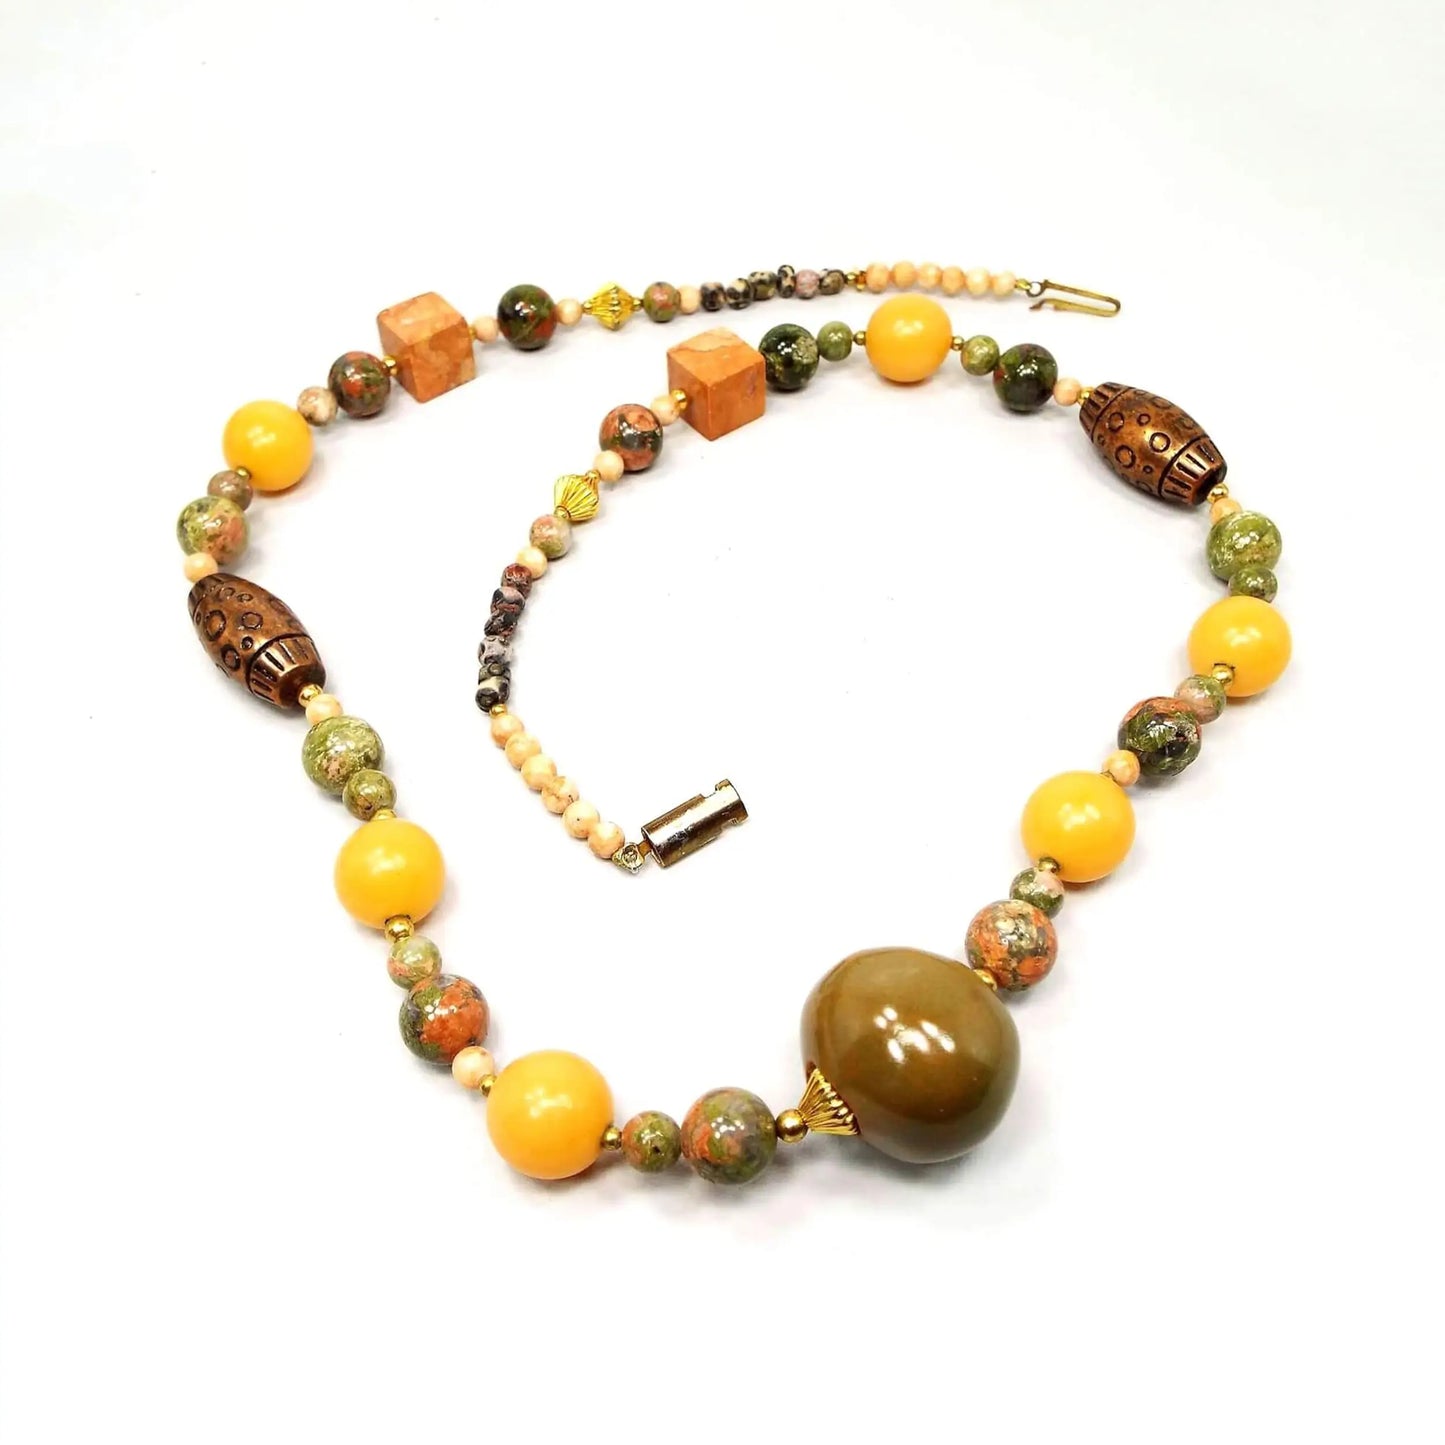 Angled view of the asymmetrical chunky beaded retro vintage Suzette necklace. There is a slide in style clasp at the end. The metal beads are gold tone and copper tone in color. There are oval, square, bicone, and round shaped beads. The colors vary with mostly green, orange, pin, and brown tones. There are porcelain, plastic, metal, and gemstone beads.